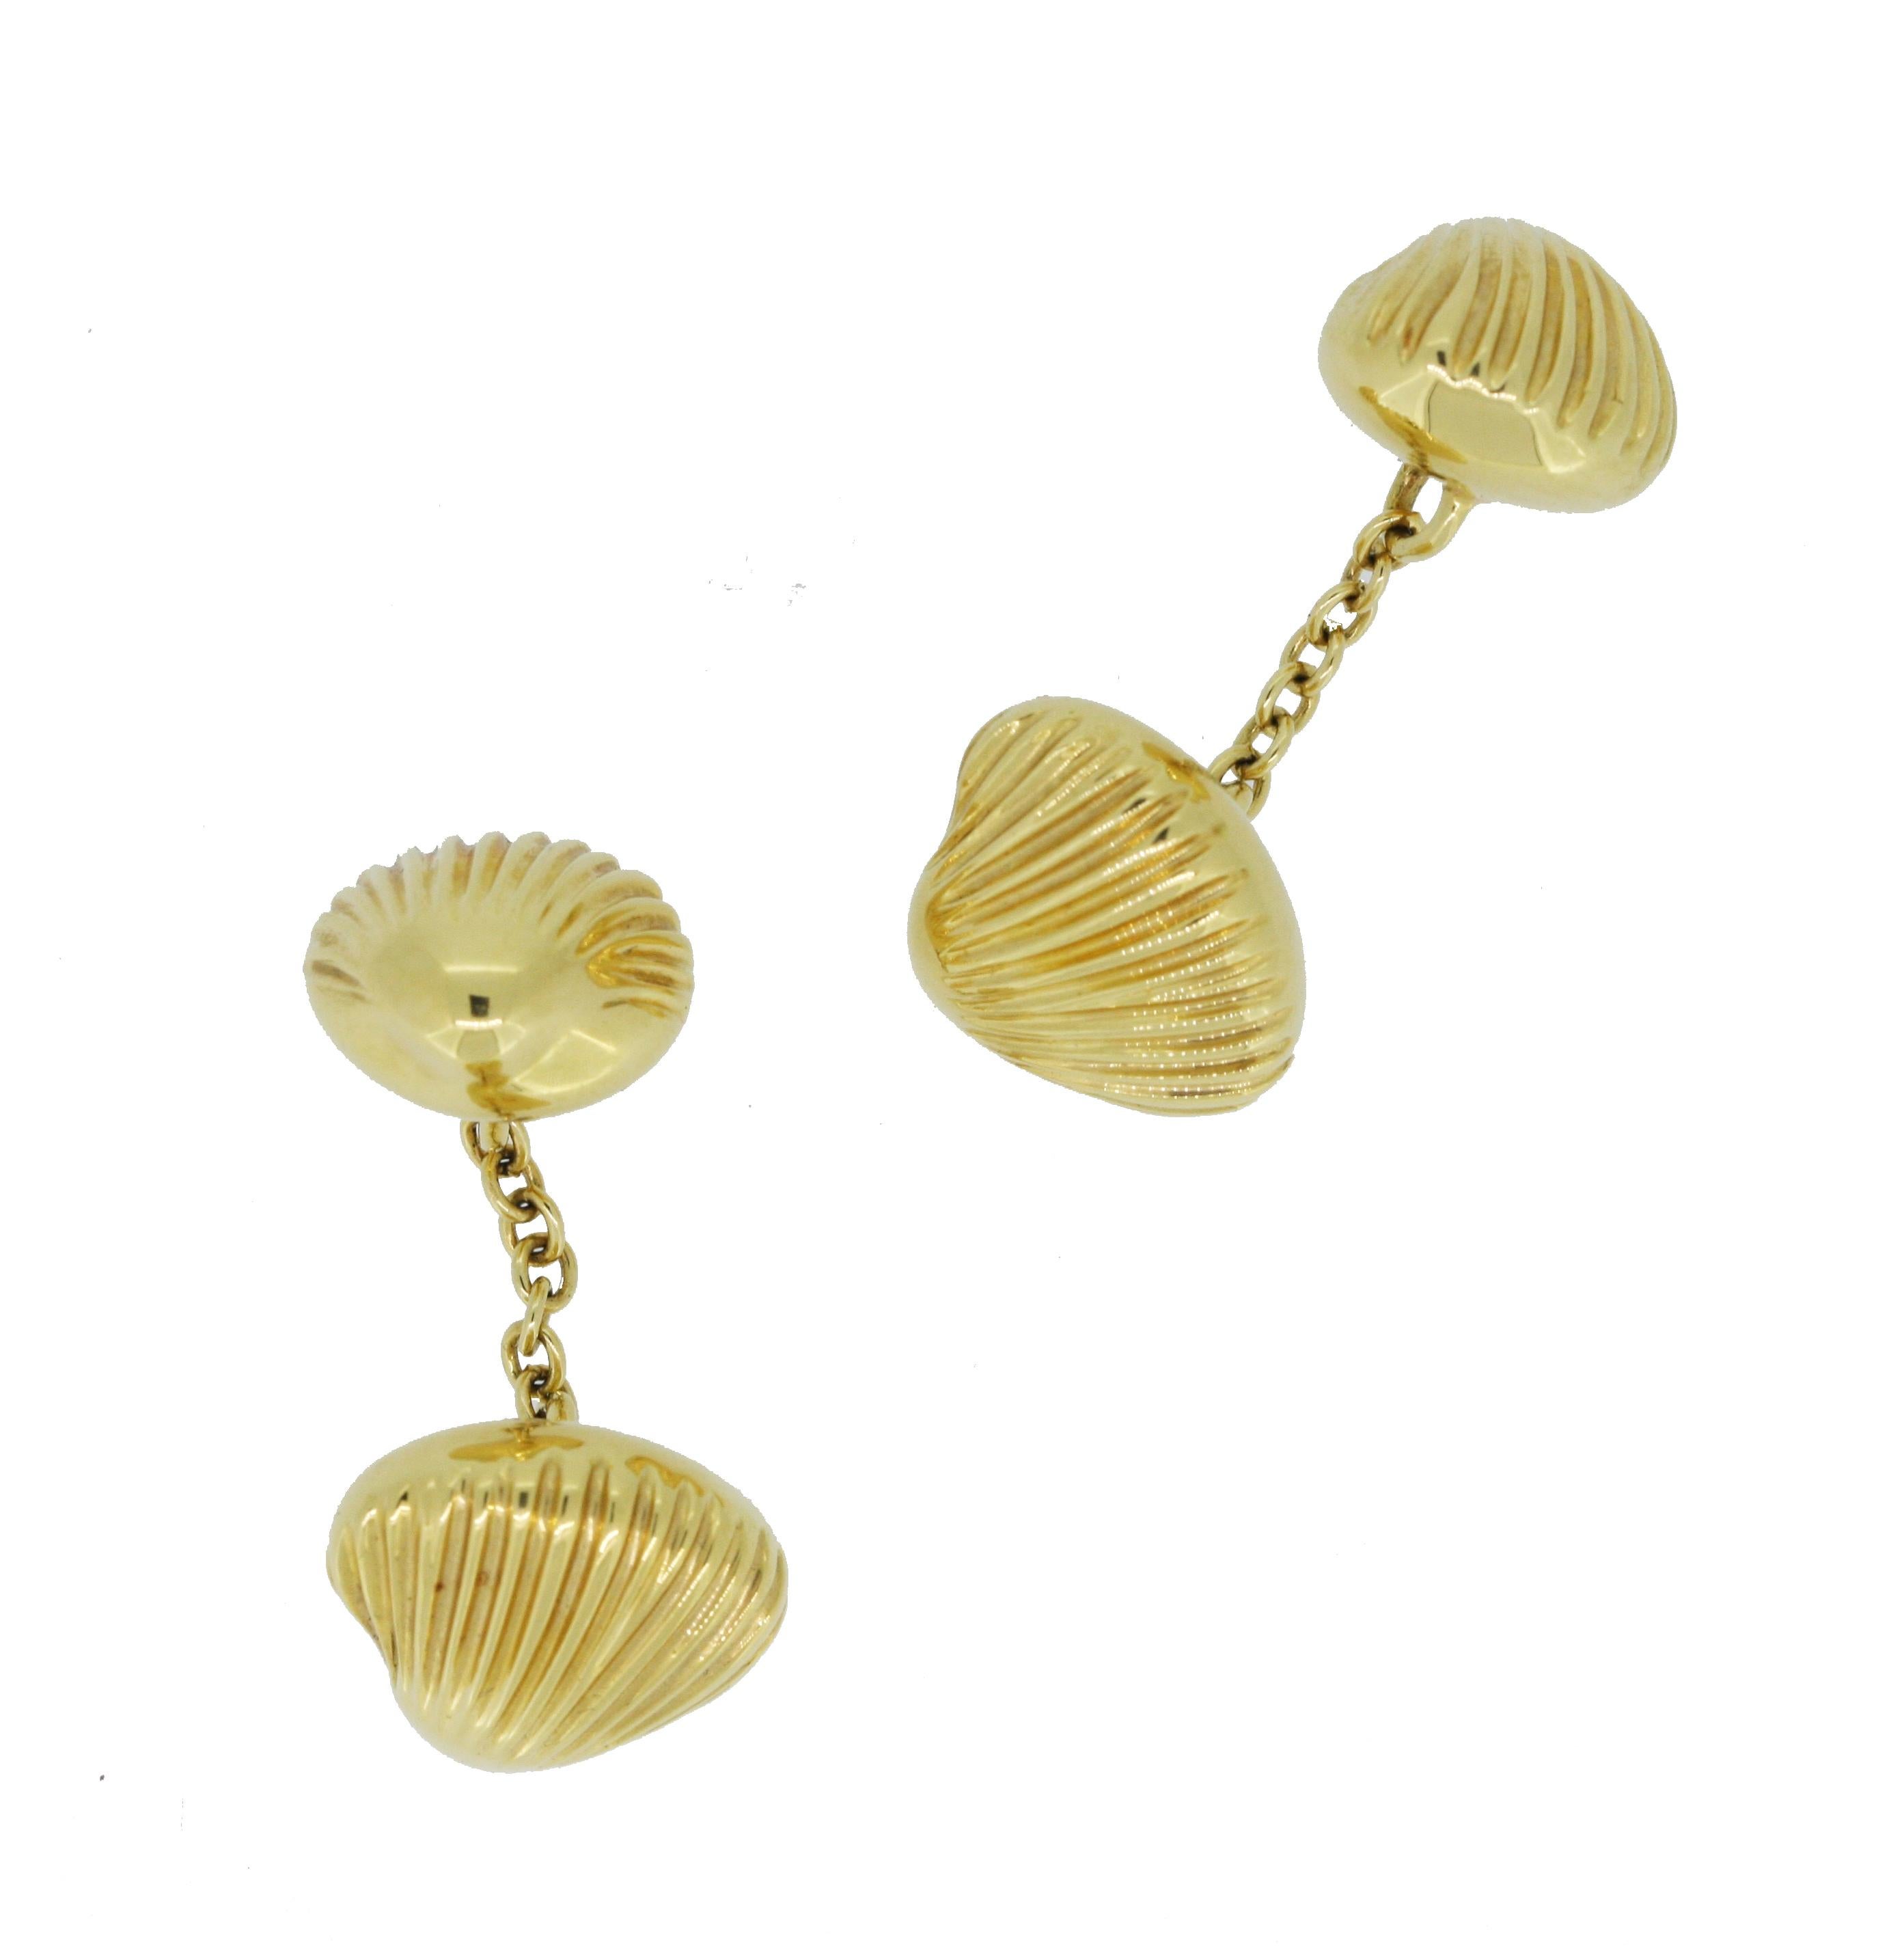 Shell Cufflinks in 18k yellow gold handmade in Italy by Antorà.
The item weights 20.20 grams of gold. 